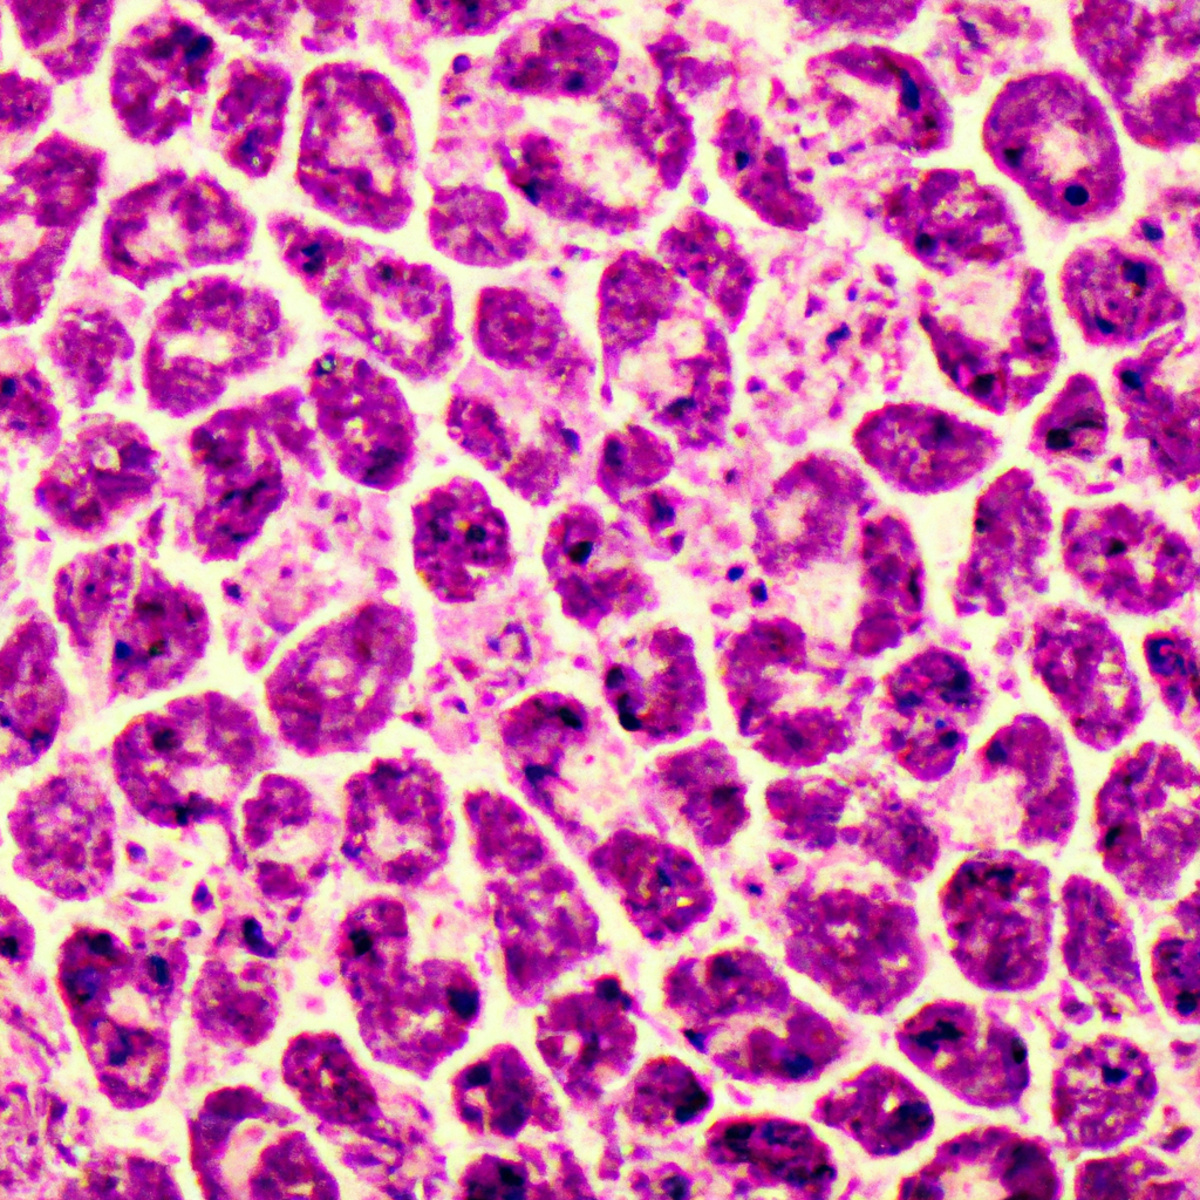 Close-up of vibrant pancreatic neuroendocrine tumor cells on a microscope slide surrounded by lab equipment - Pancreatic Neuroendocrine Tumors (PNETs)